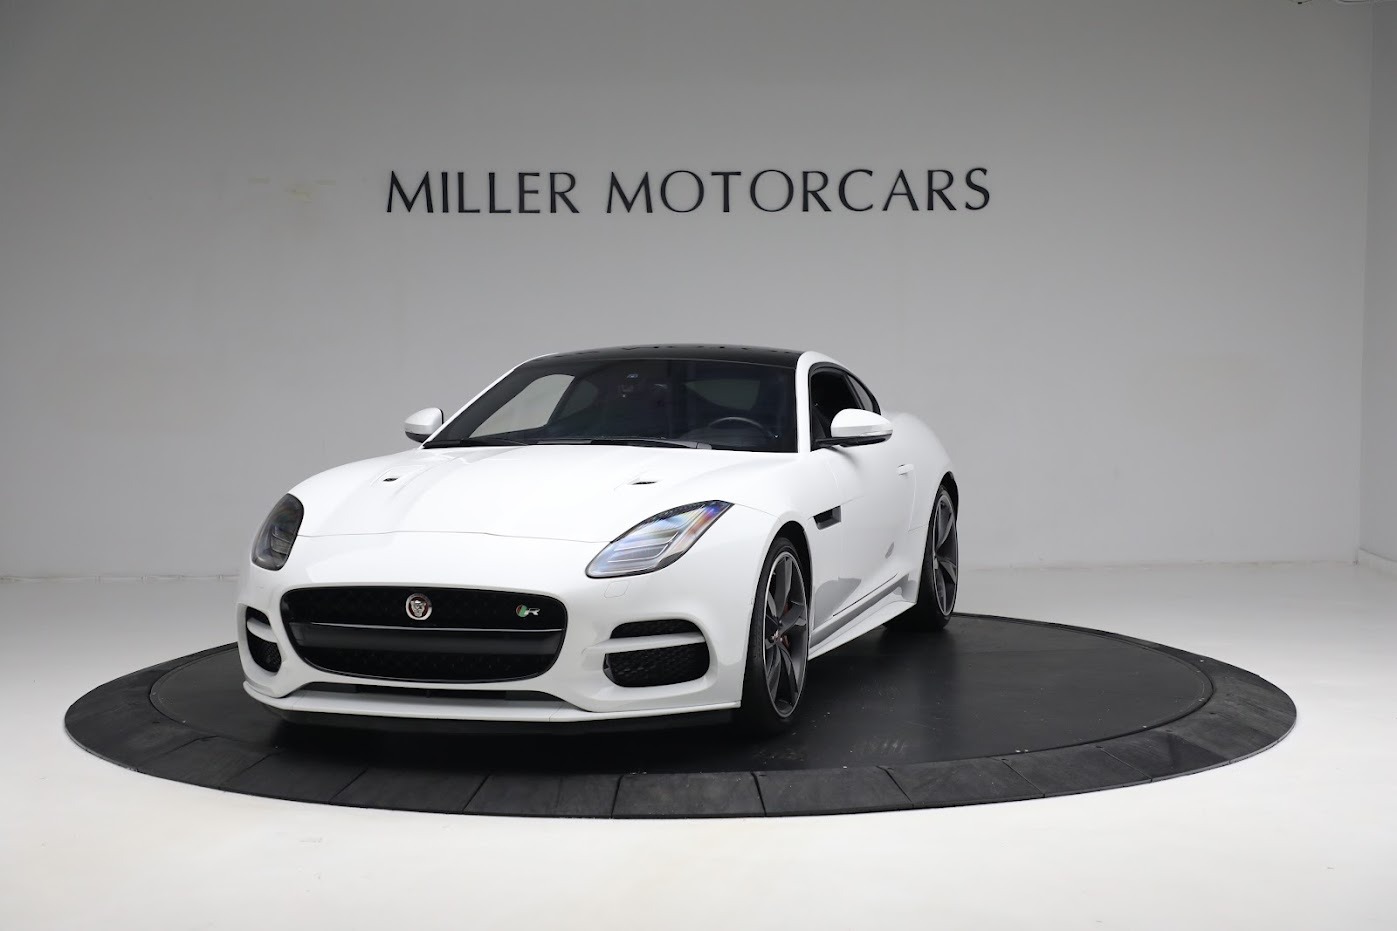 Used 2018 Jaguar F-TYPE R for sale $56,900 at McLaren Greenwich in Greenwich CT 06830 1